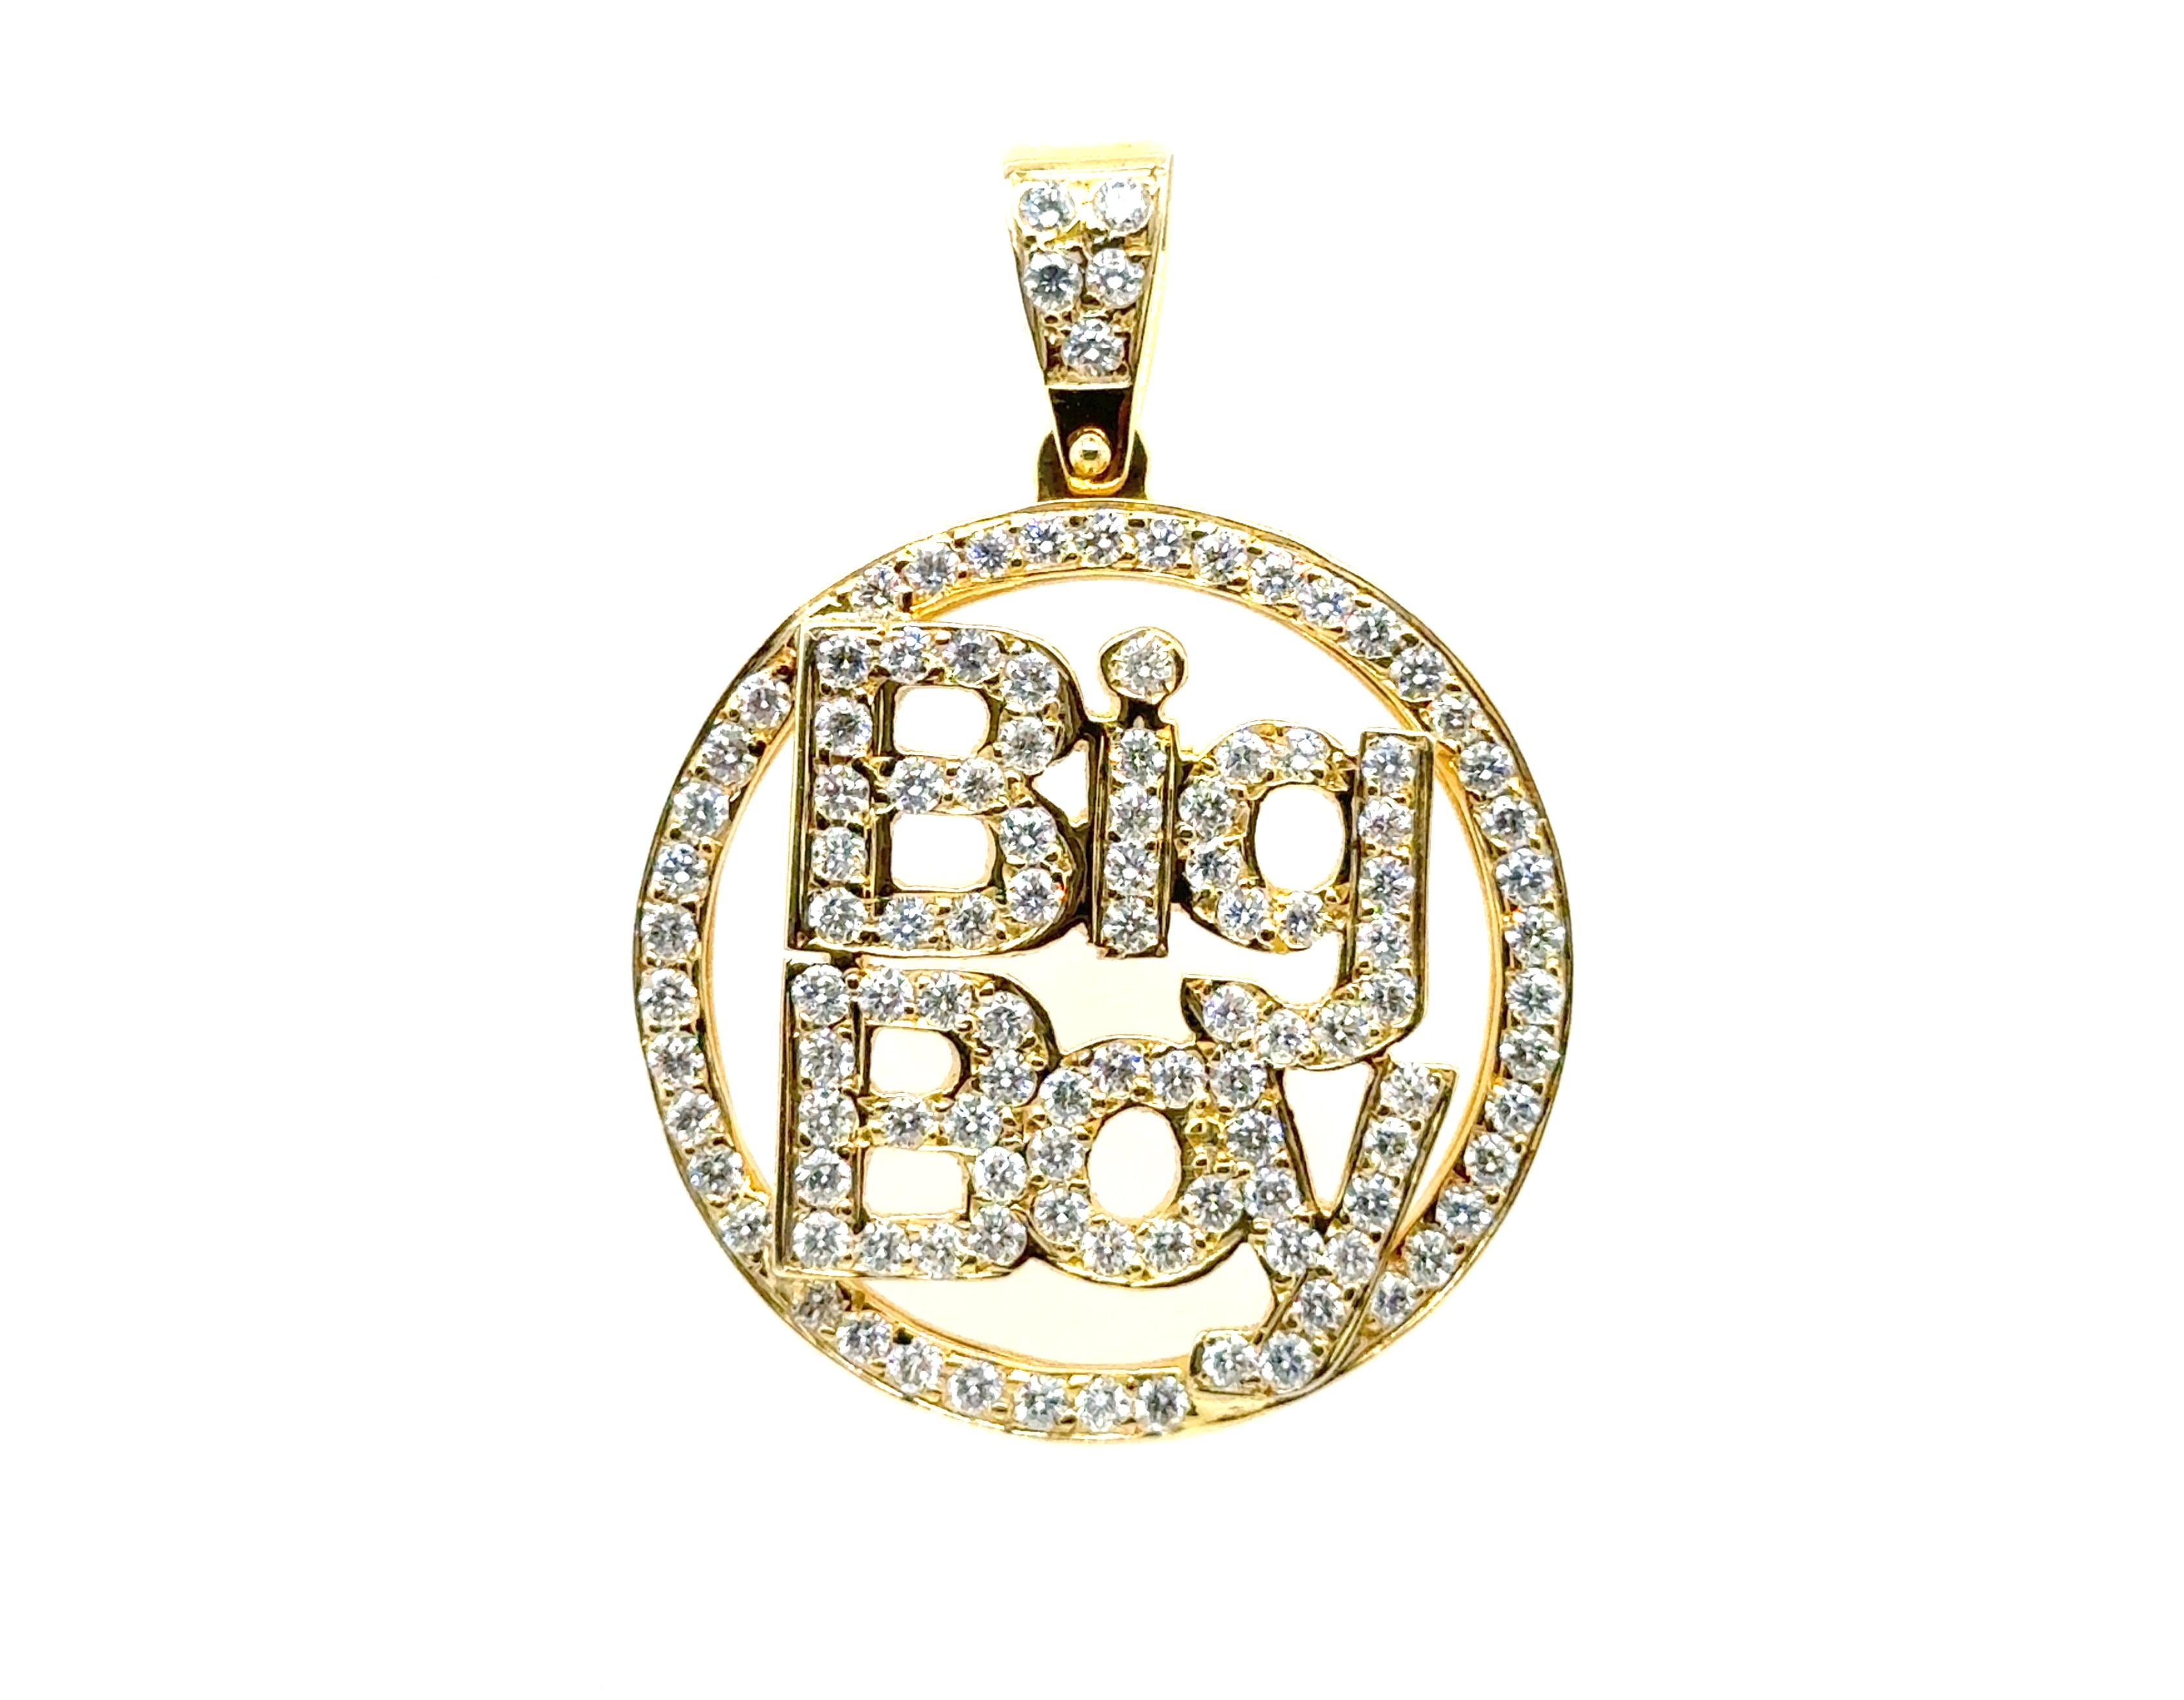 Bling Diamond Pendant Necklace 3.30 Carat Big Boy 18K Yellow Gold 3ct In Excellent Condition For Sale In Dearborn, MI